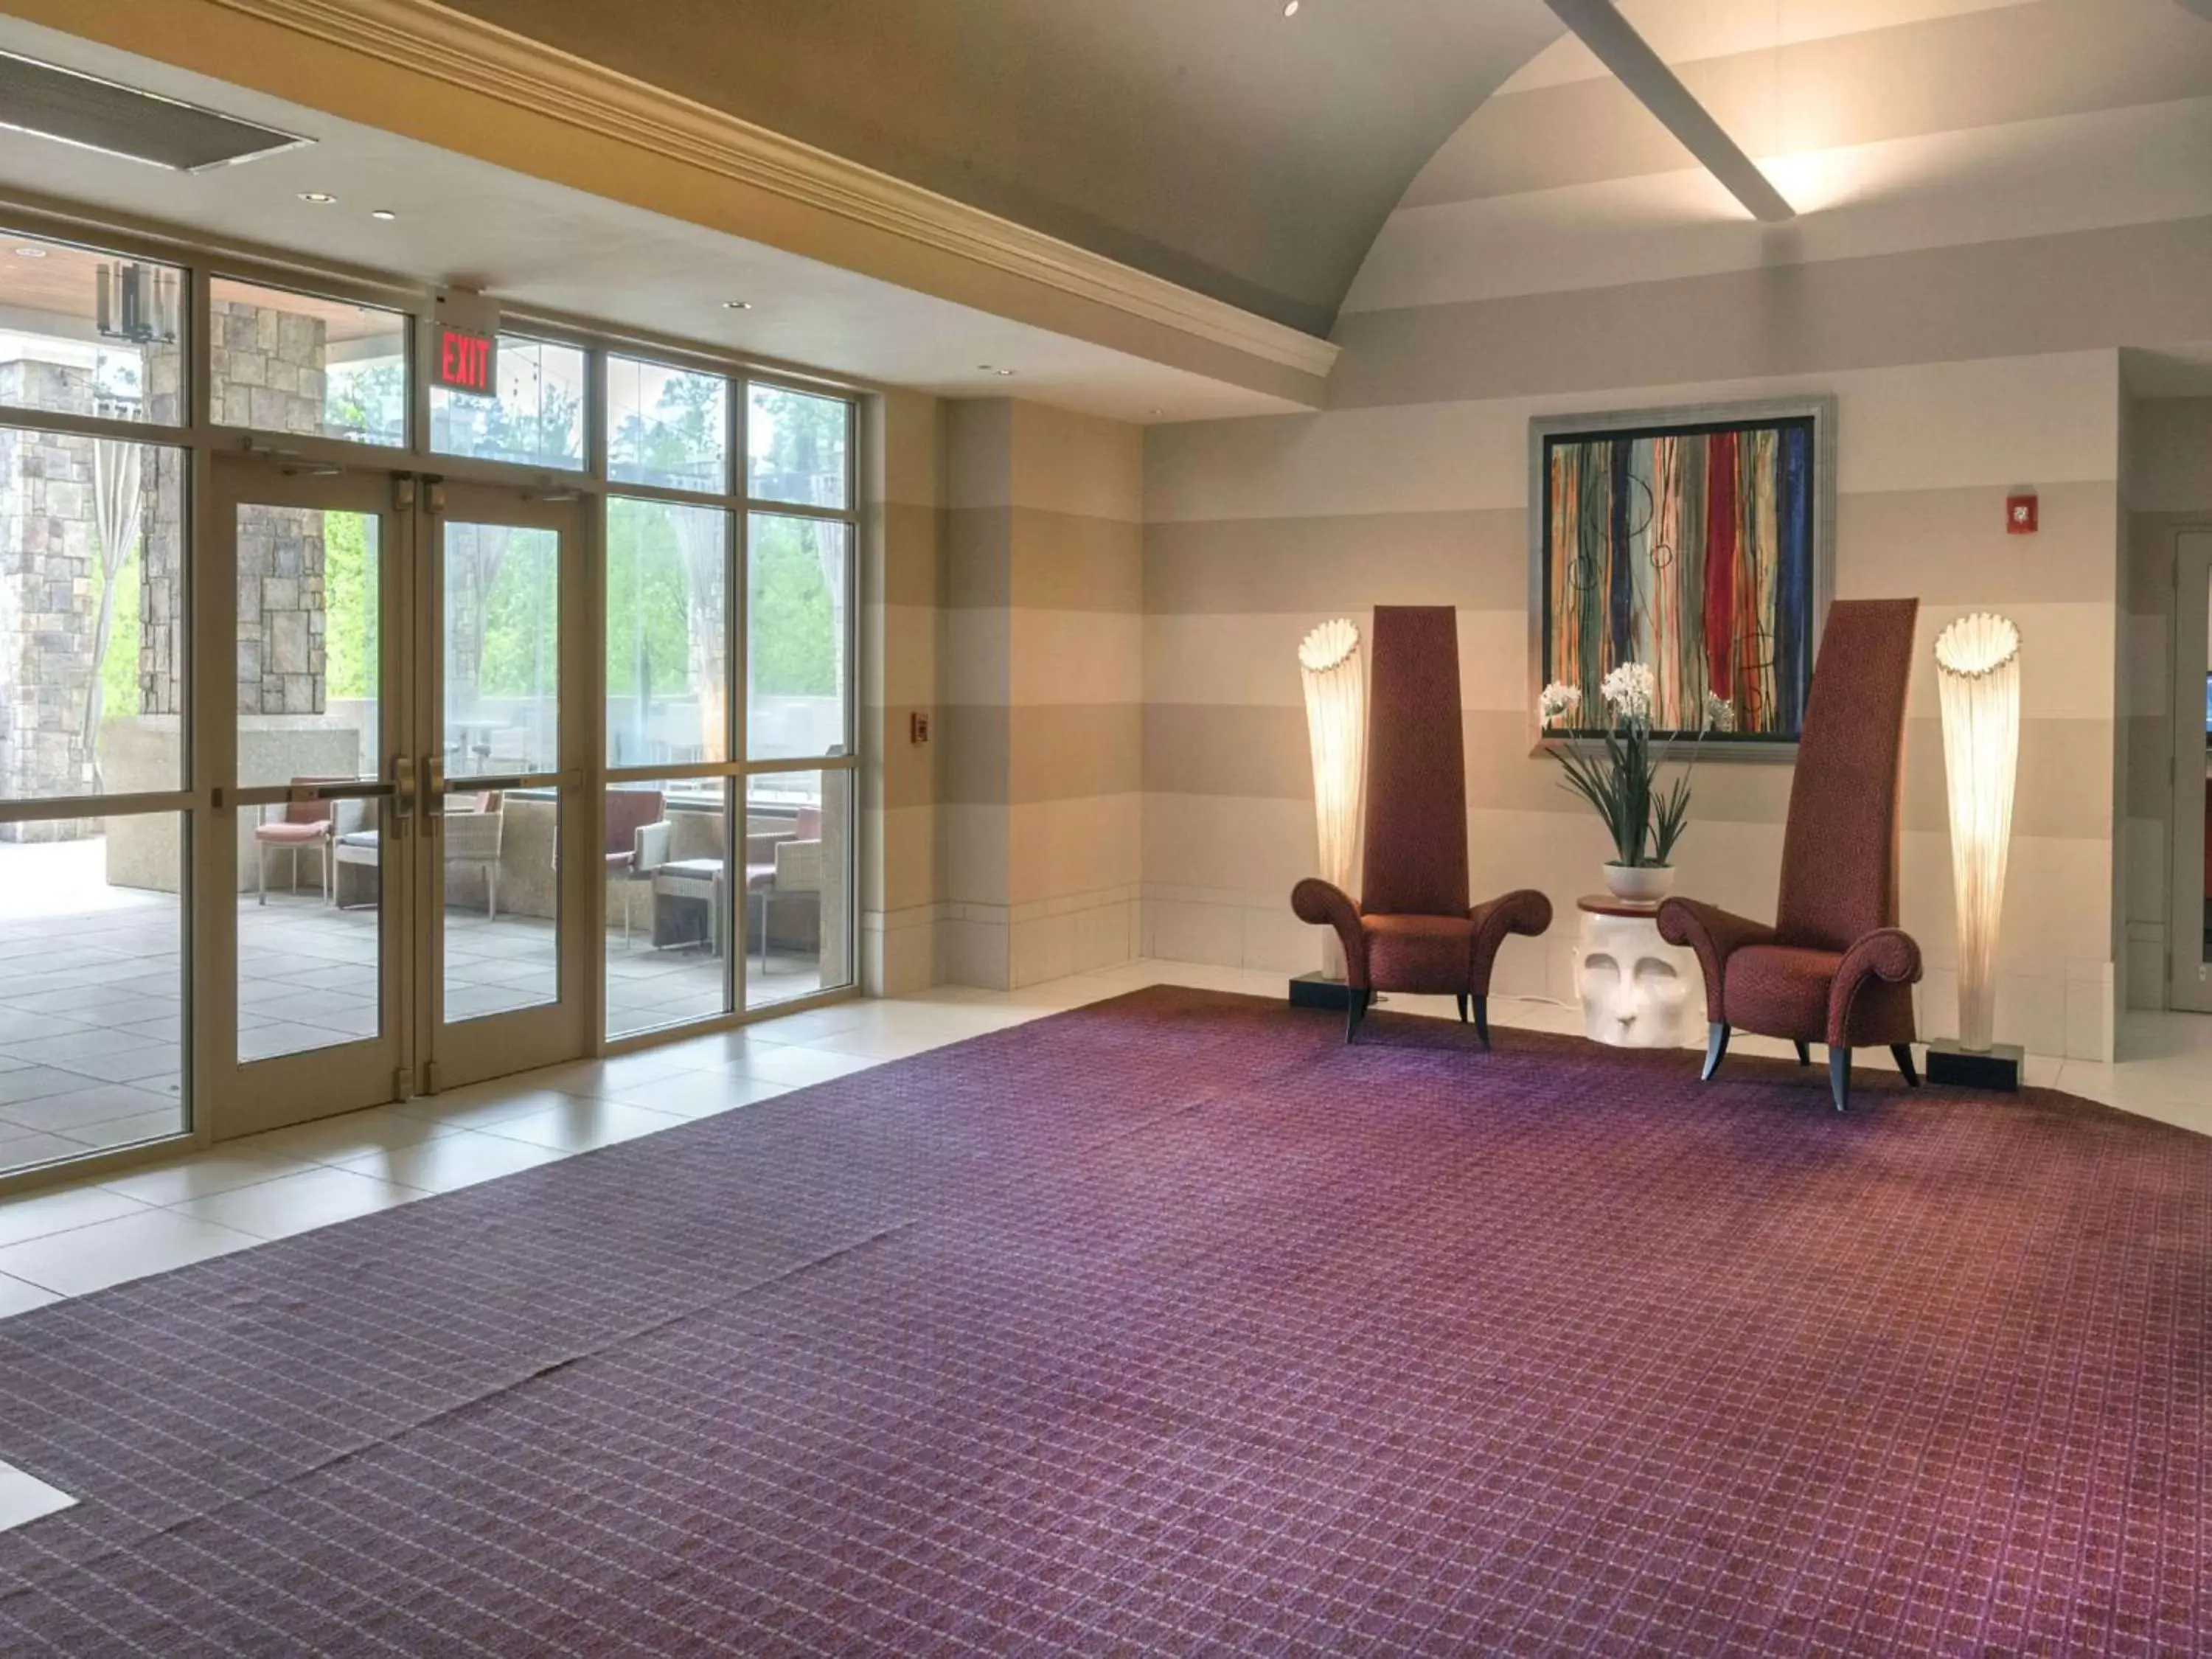 Meeting/conference room in Embassy Suites by Hilton Raleigh Durham Airport Brier Creek